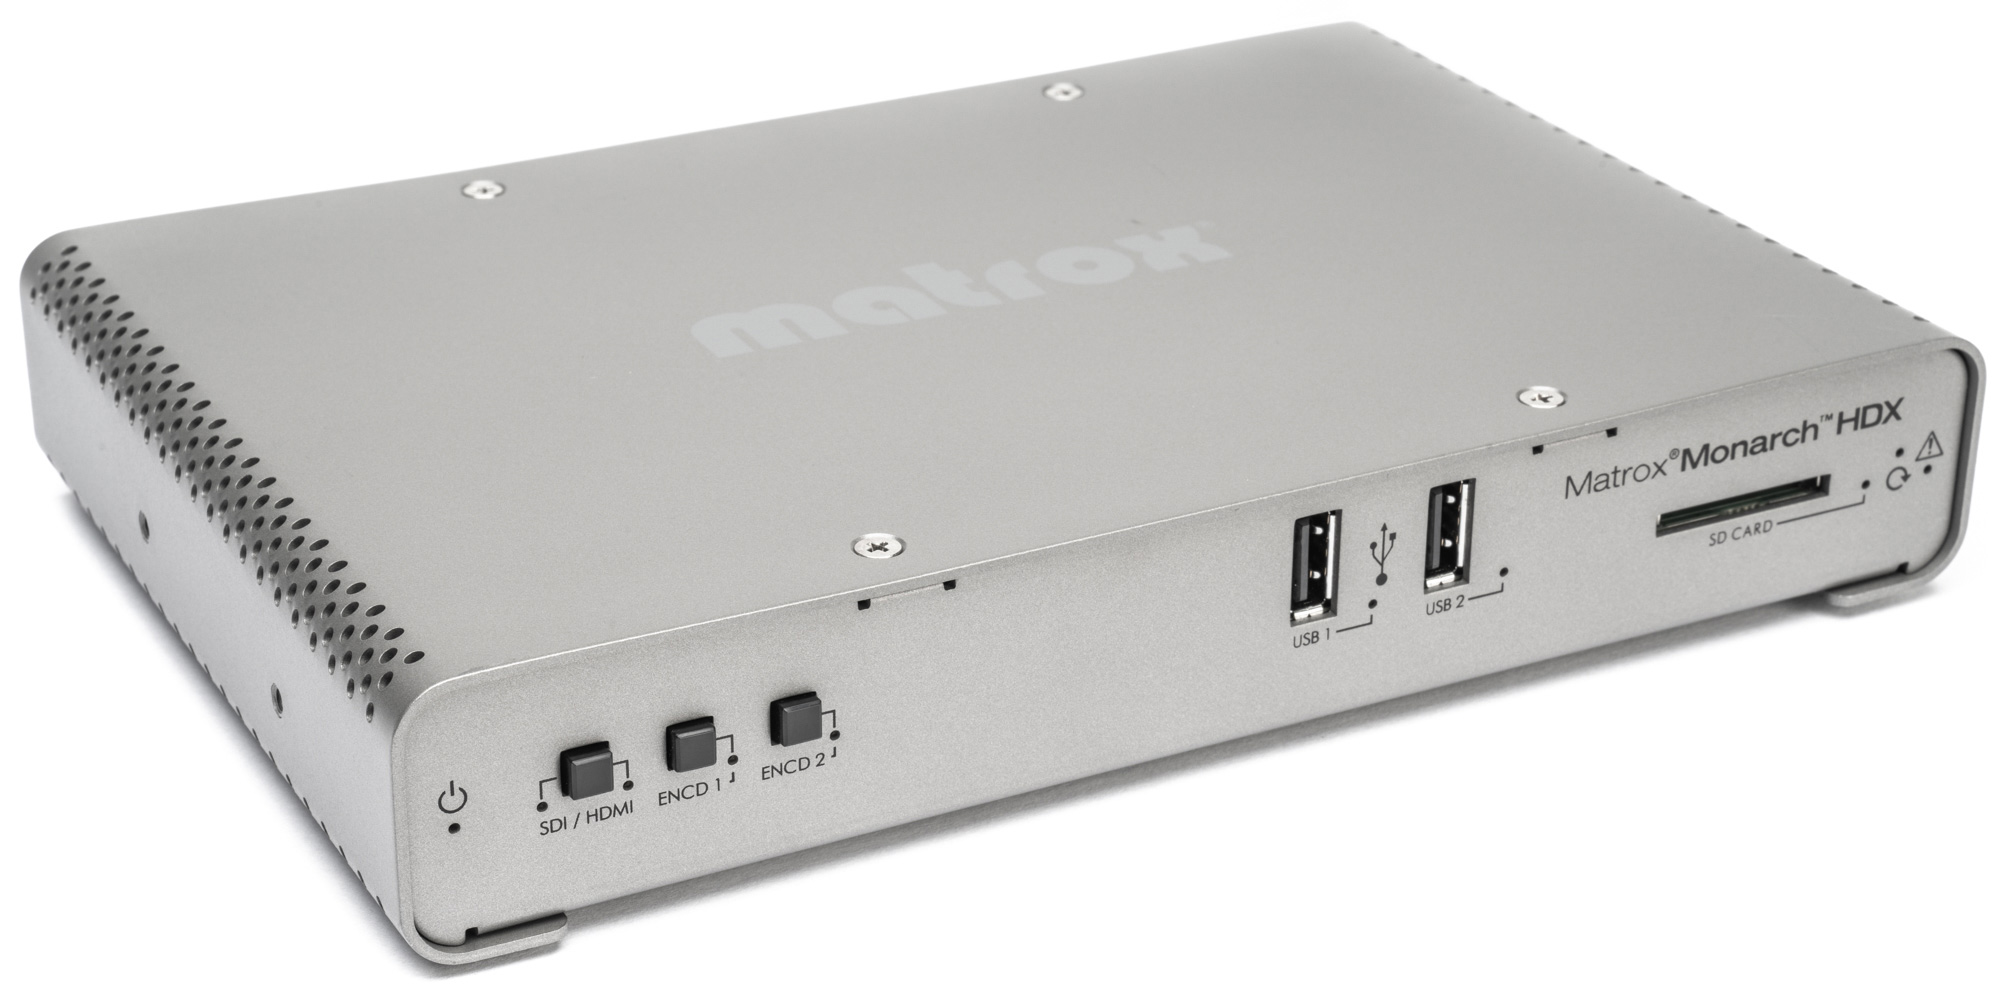 Matrox MHDX/I Monarch HDX Dual-Channel H.264 Encoder for